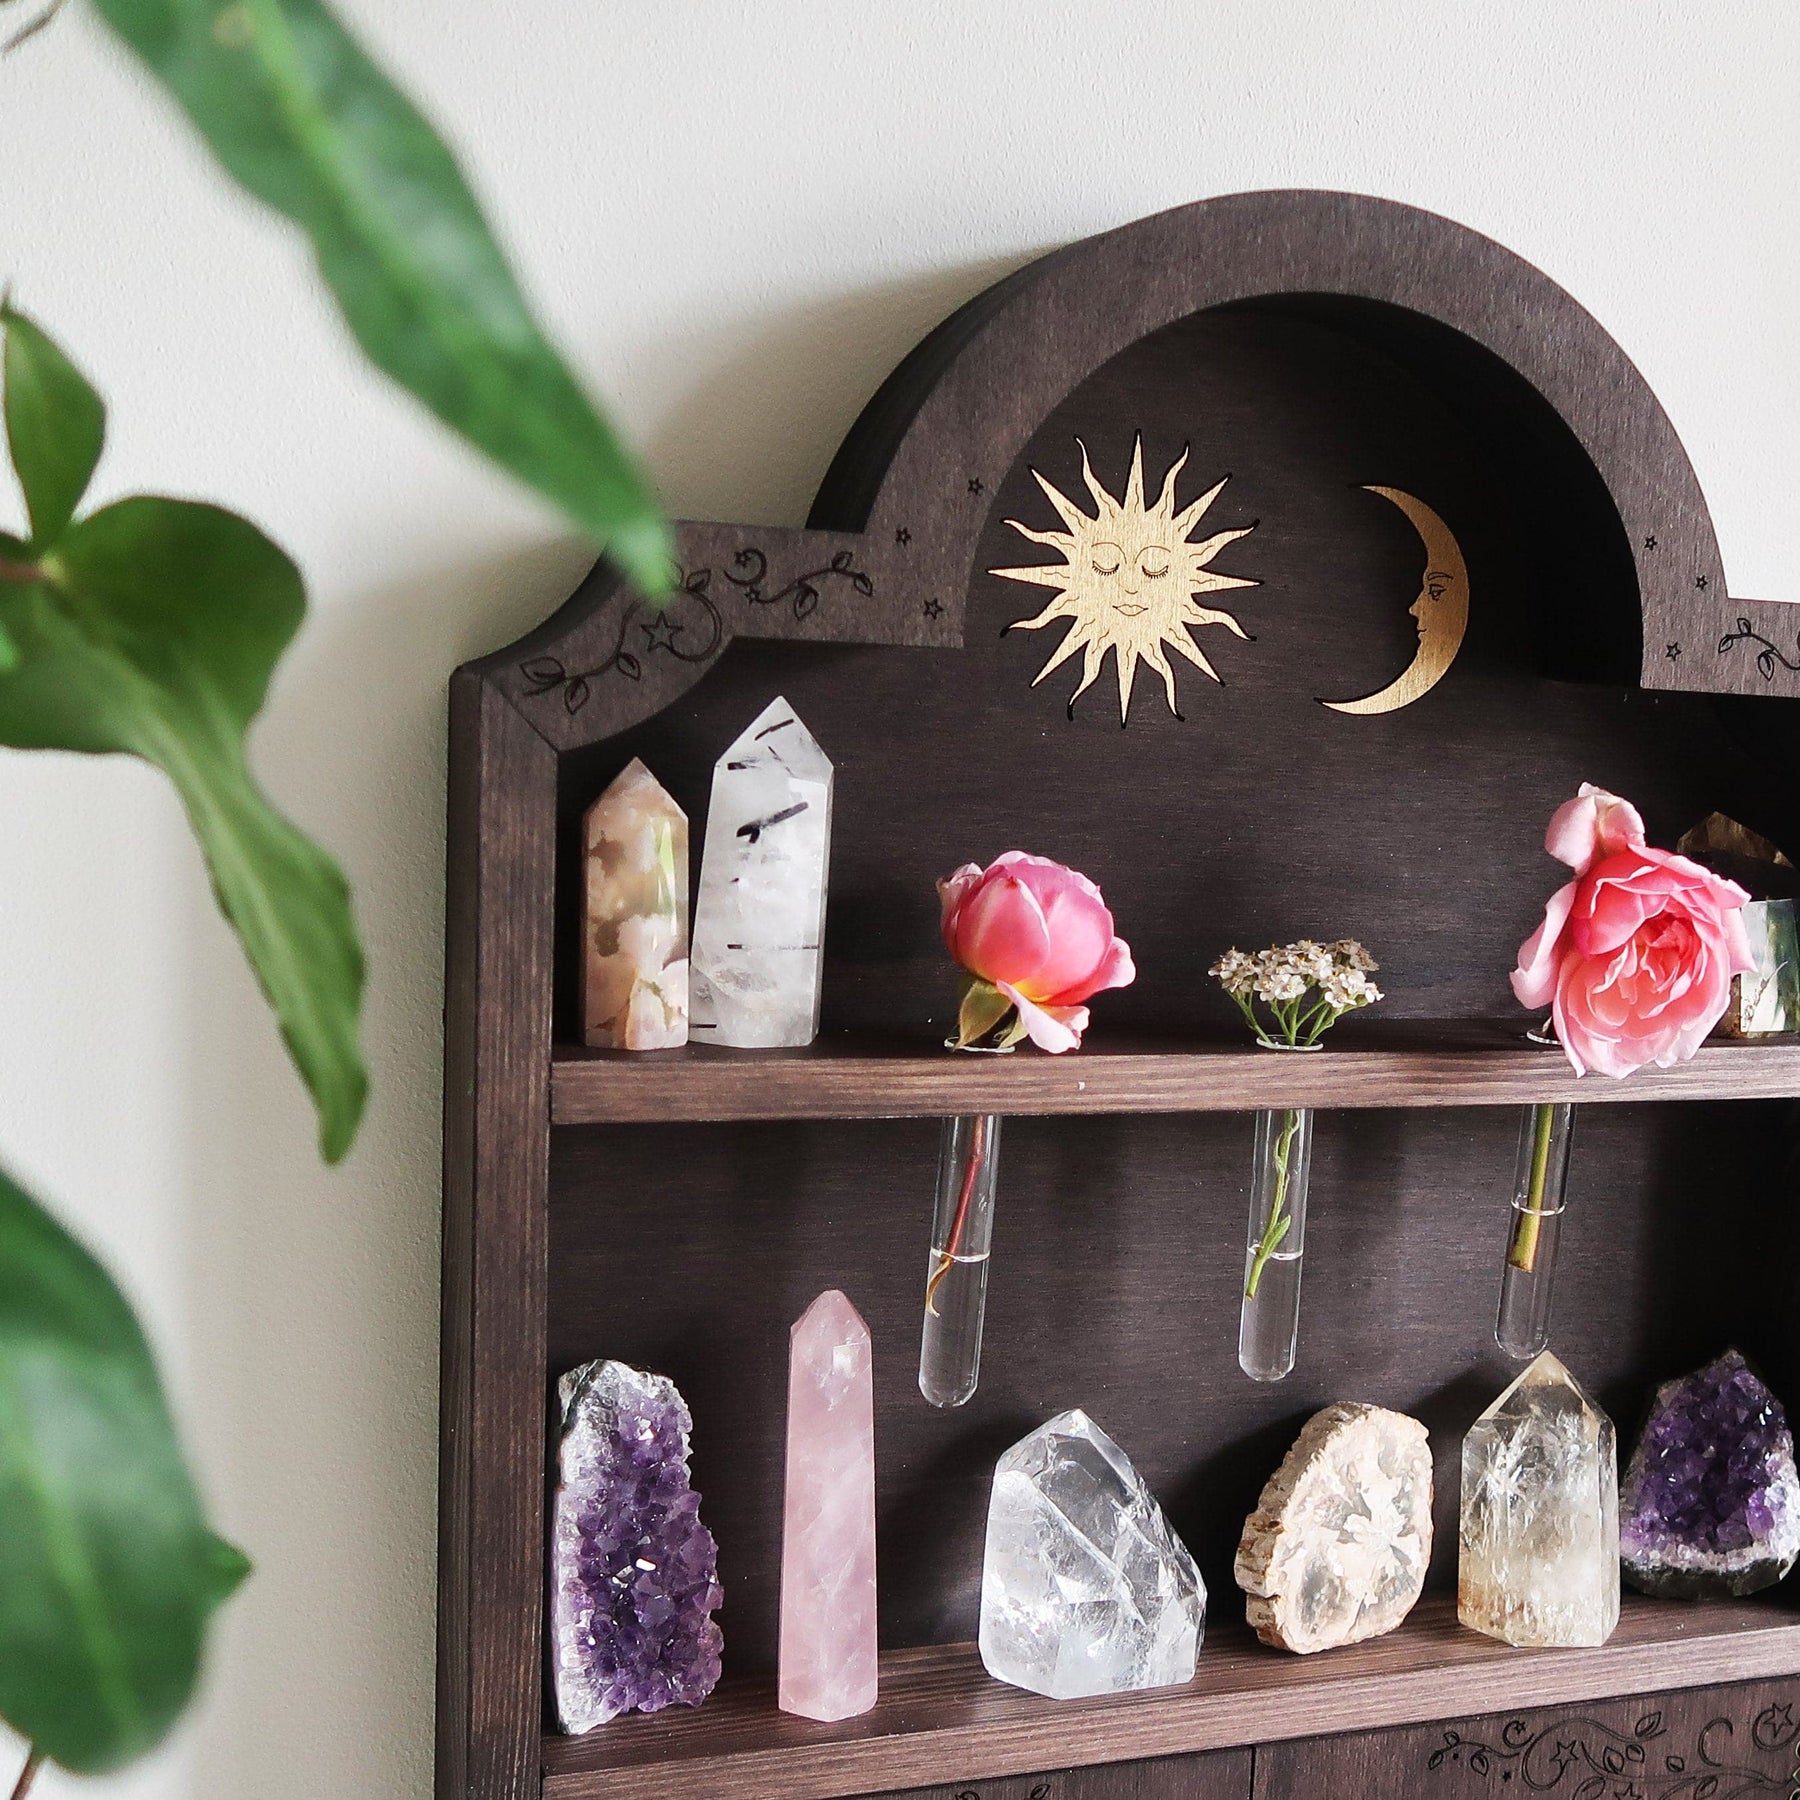 Magical Apothecary Bookcase Decor - Wood - Paper - Glass from Apollo Box